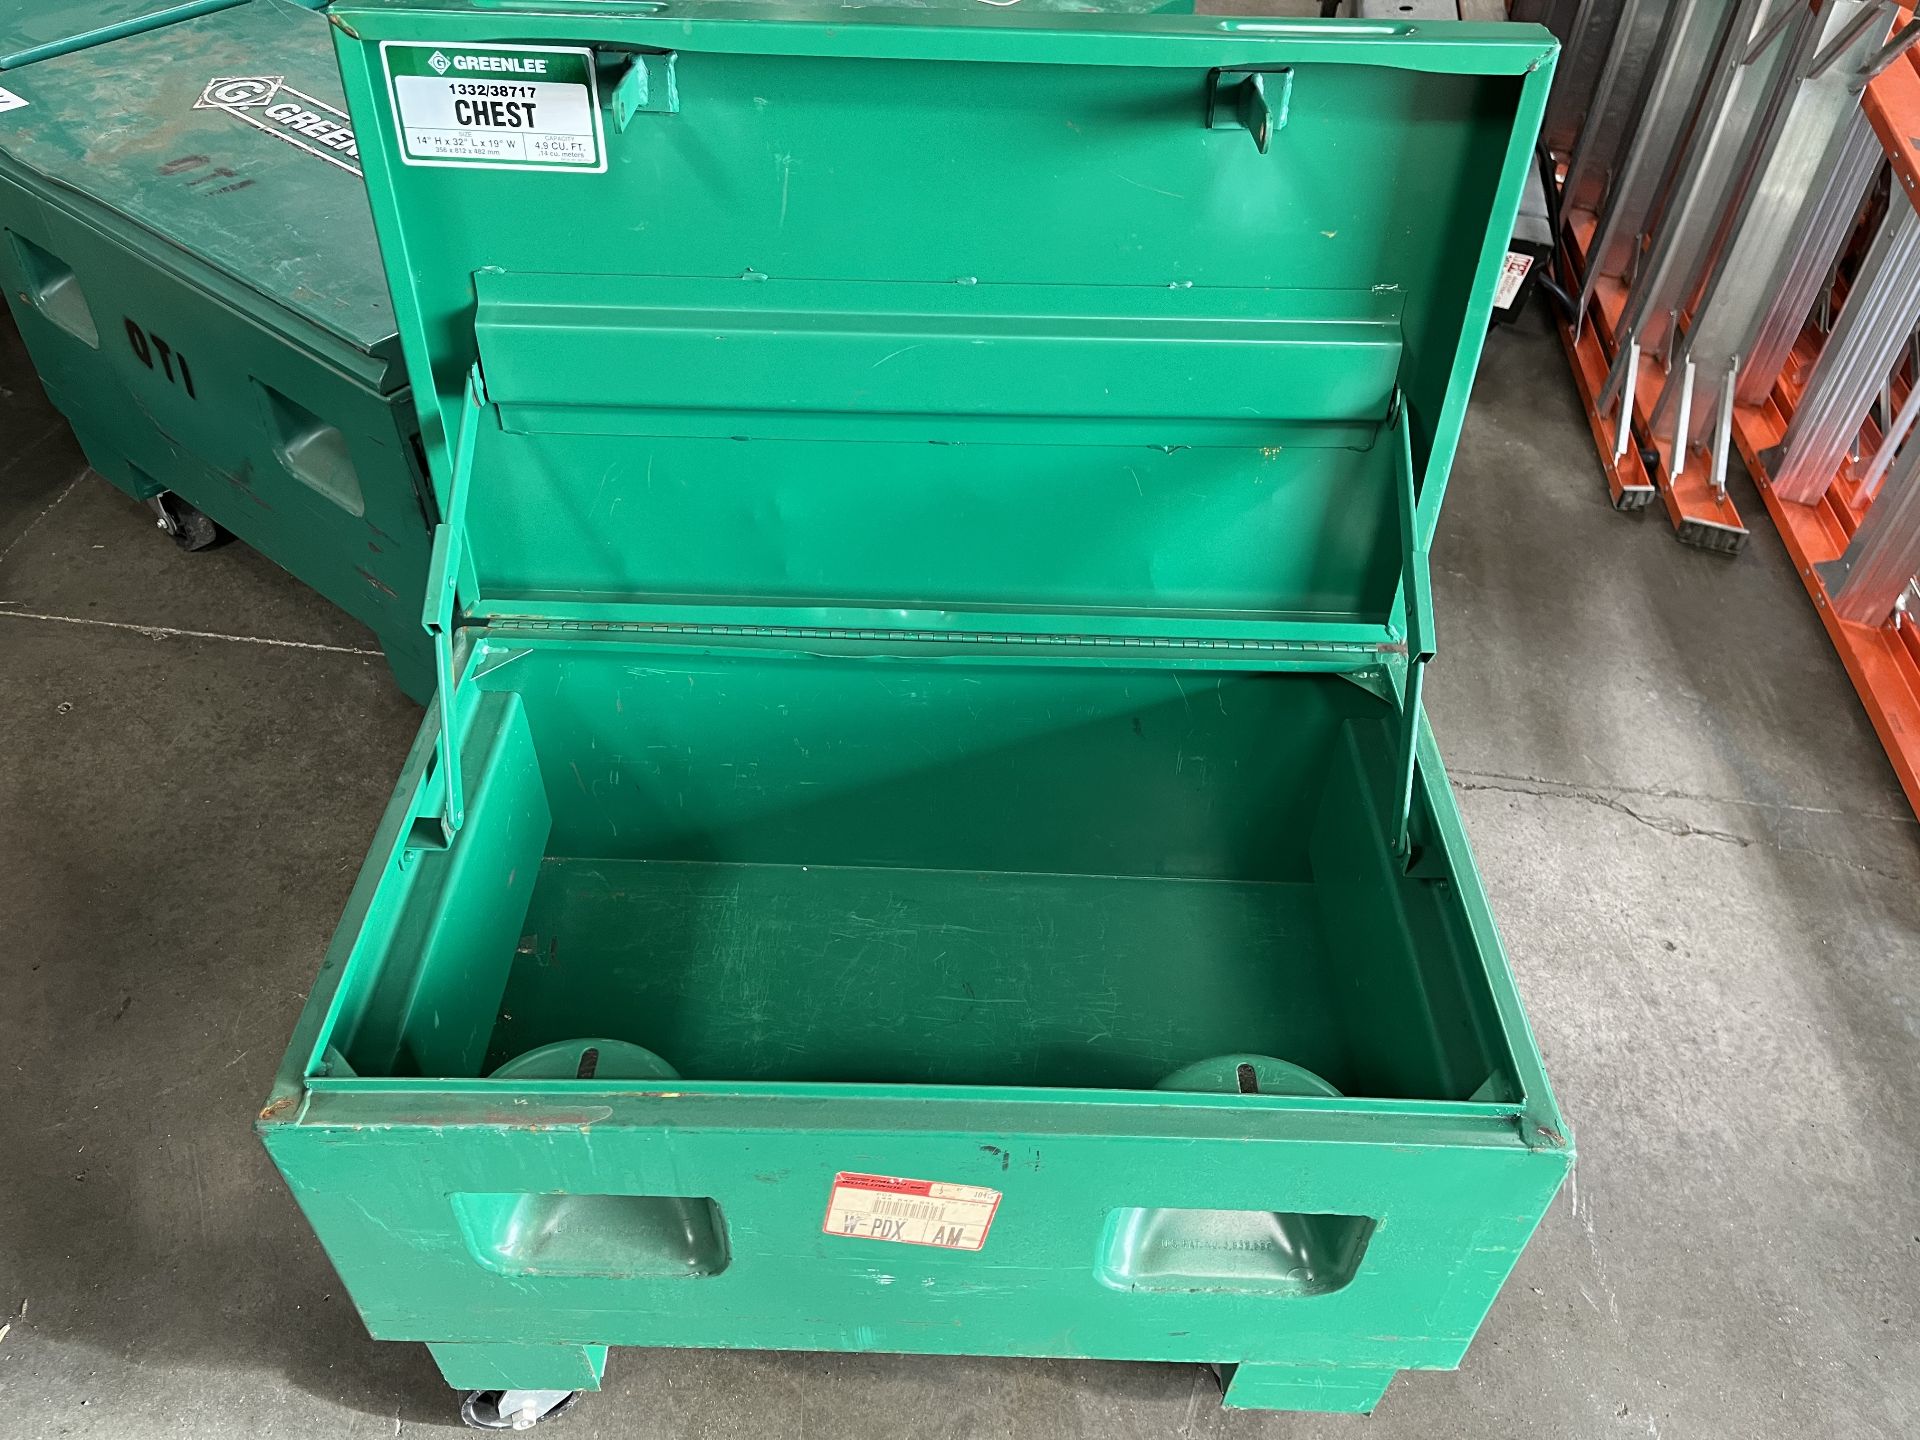 Greenlee 14" X 32" X 19" Job Box on casters Model 1332/38717 - Image 2 of 2